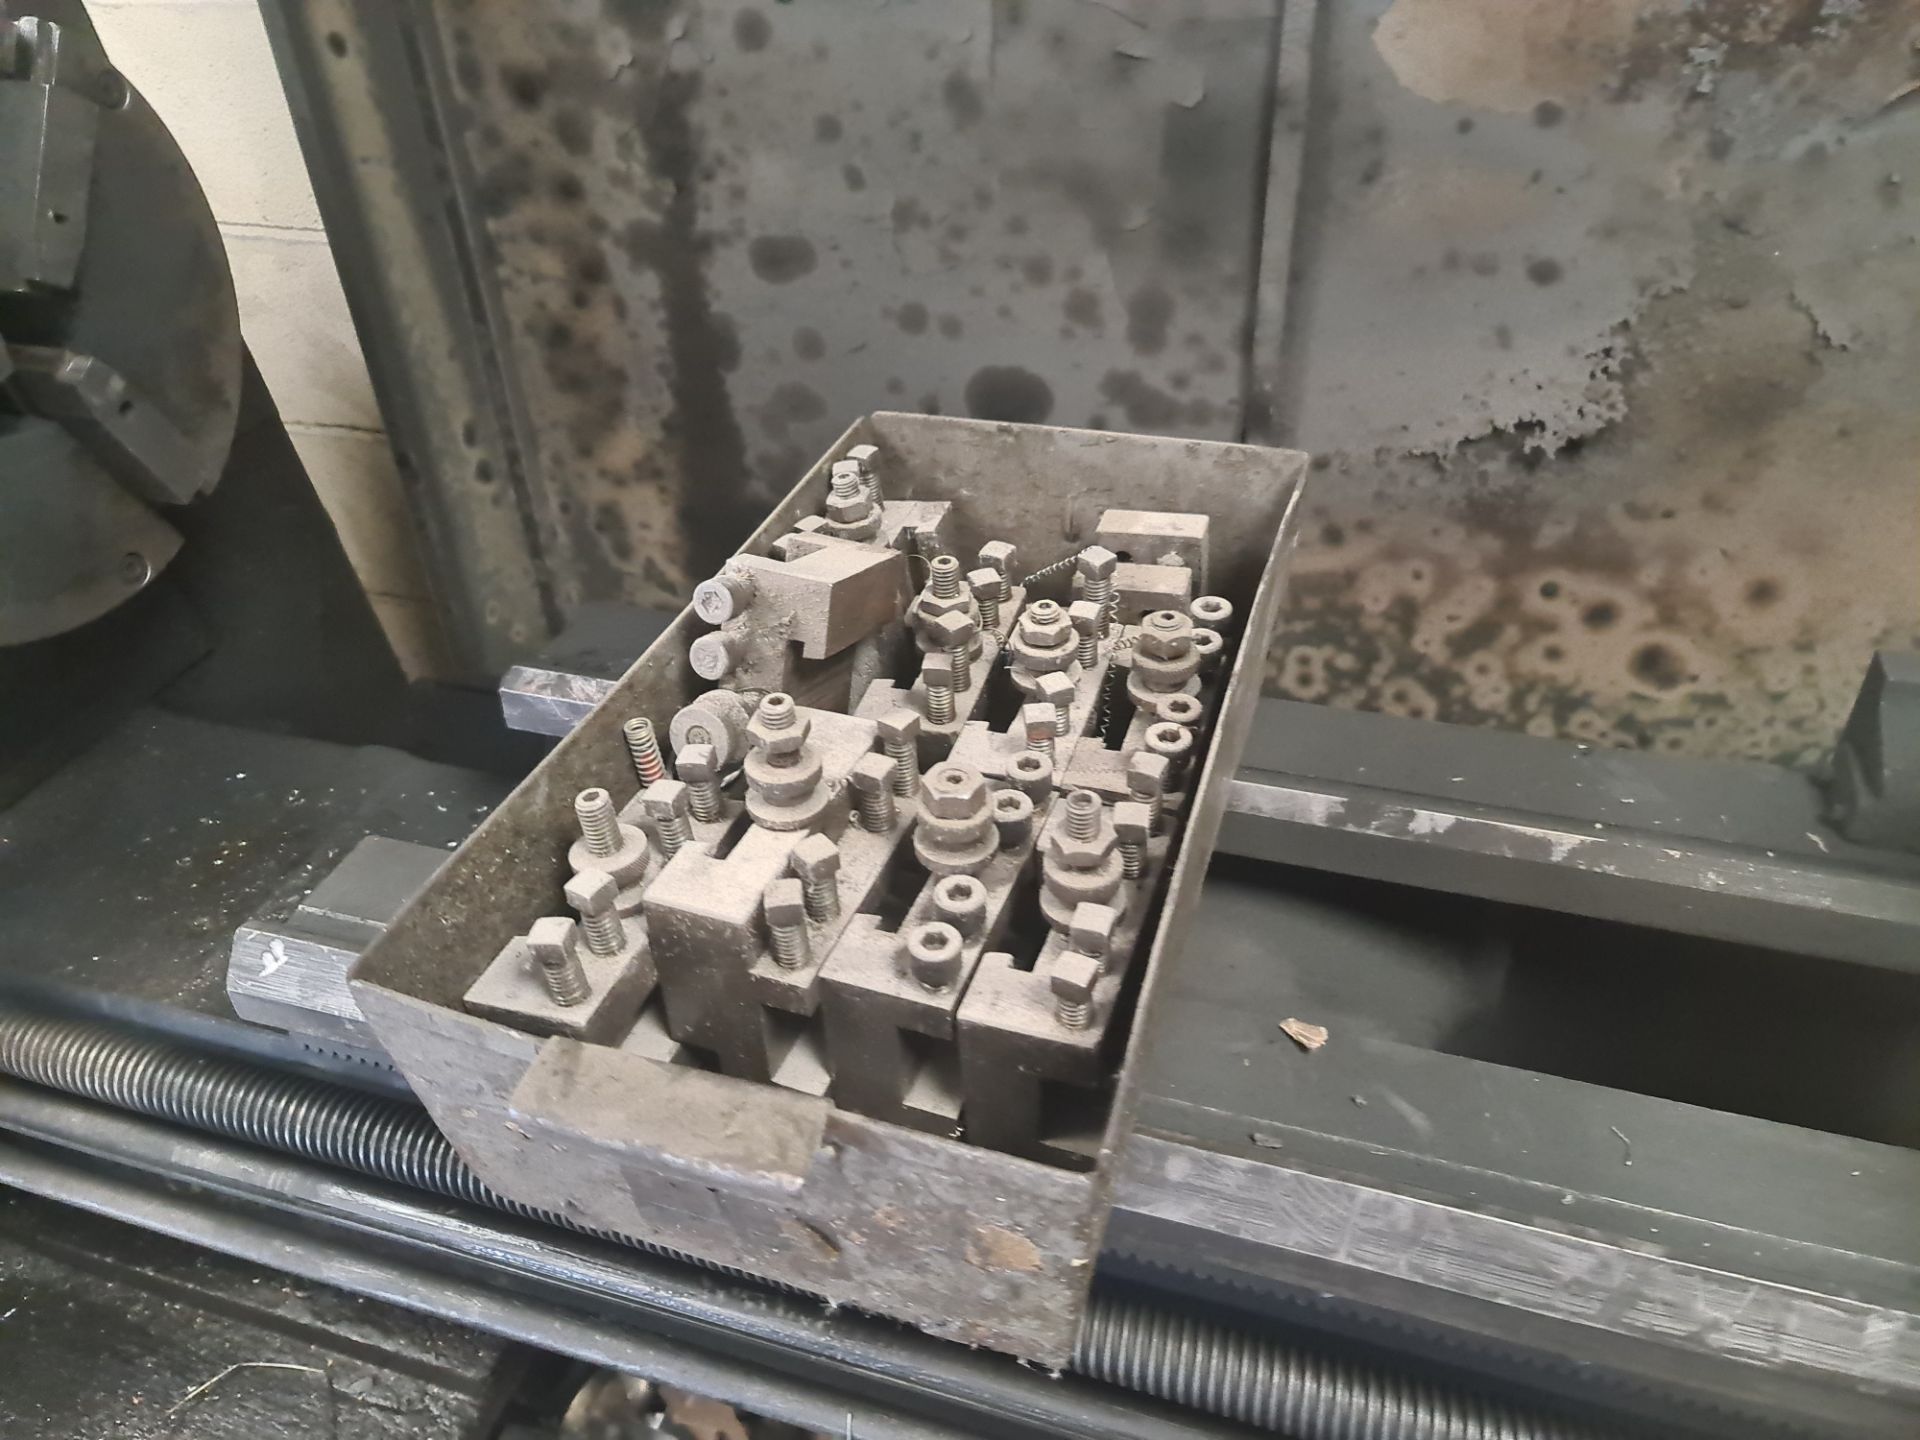 Colchester Mascot 1600/600 lathe including tooling situated on the machine all as pictured - Image 15 of 30